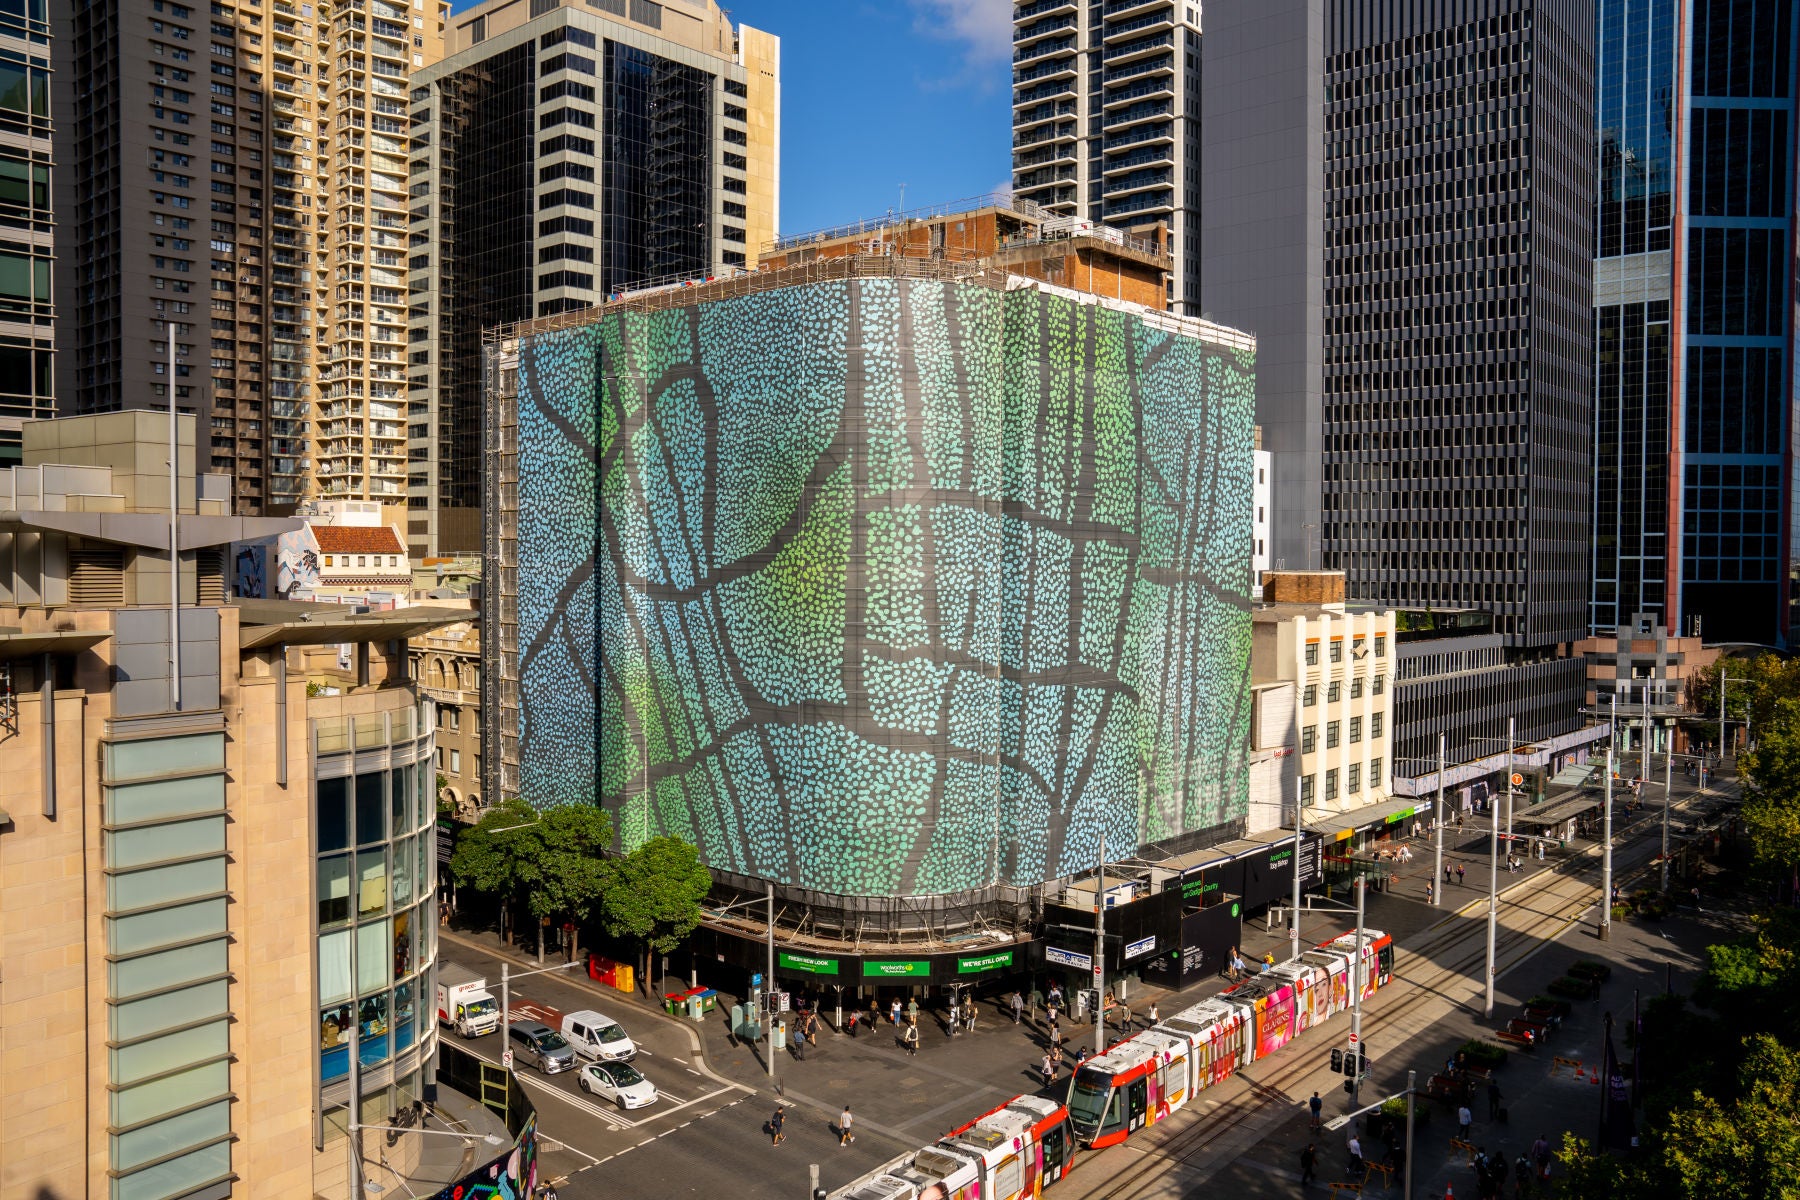 Woolworths building in Sydney city centre with artwork by Toby Bishop.